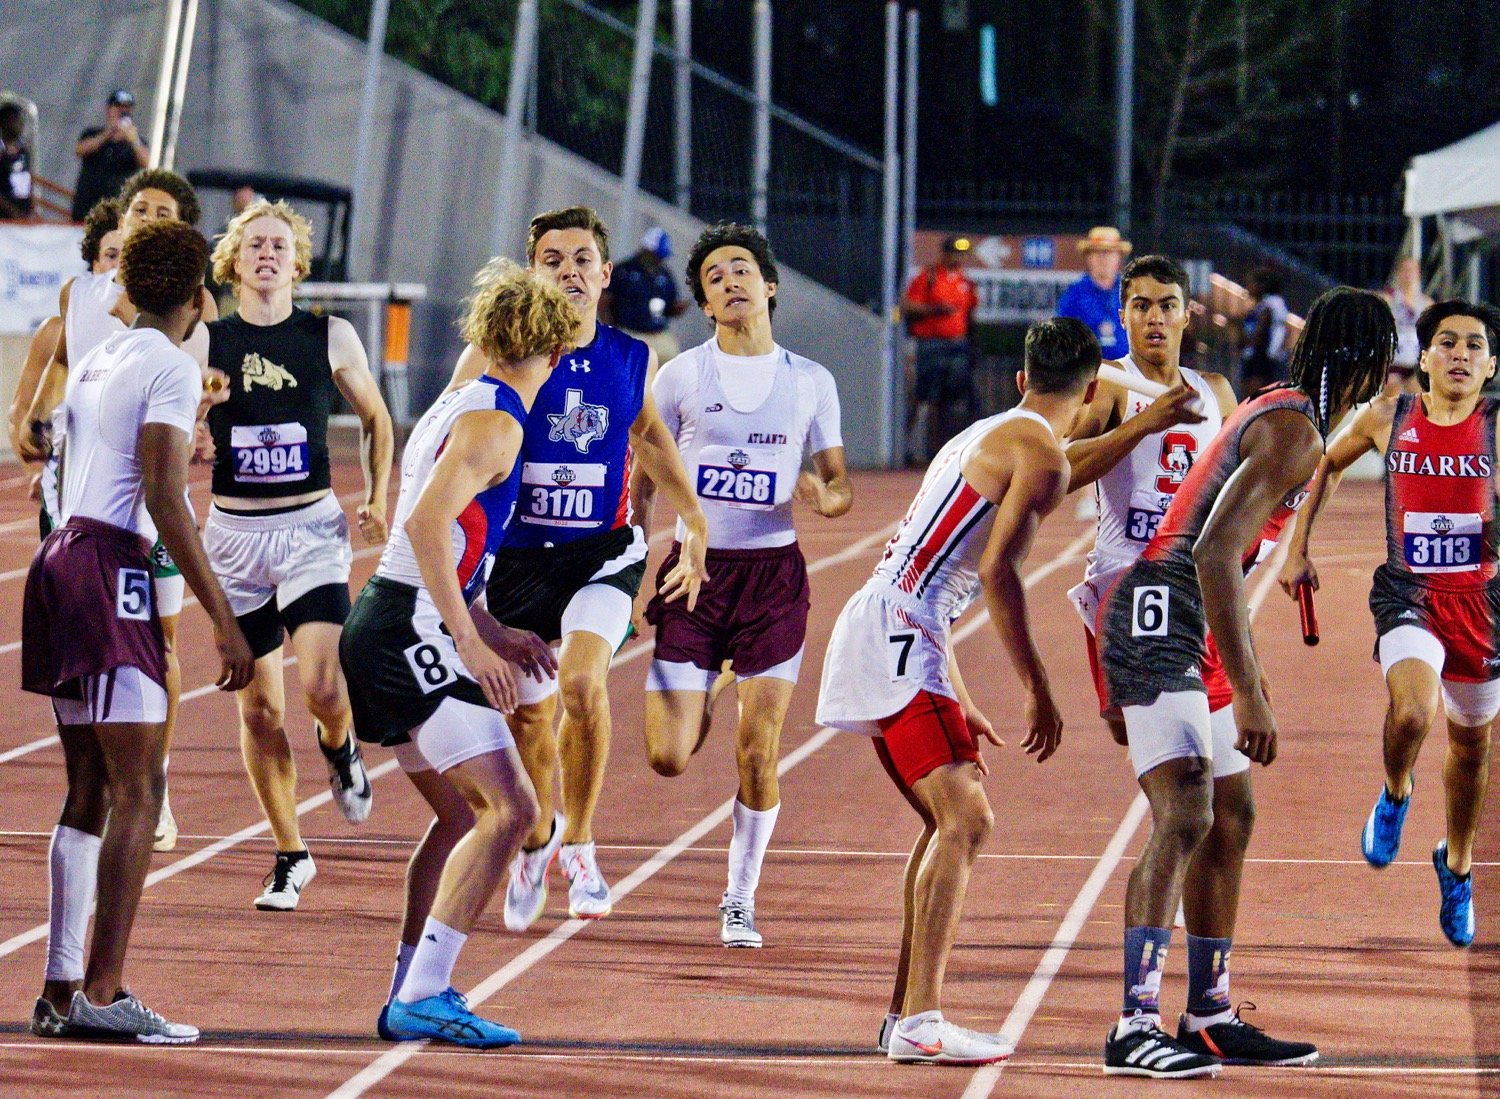 Brandon Jimenez hands the lead off the Jack Tannebaum in the 4x400 relay. [see more sprinters, soarers]